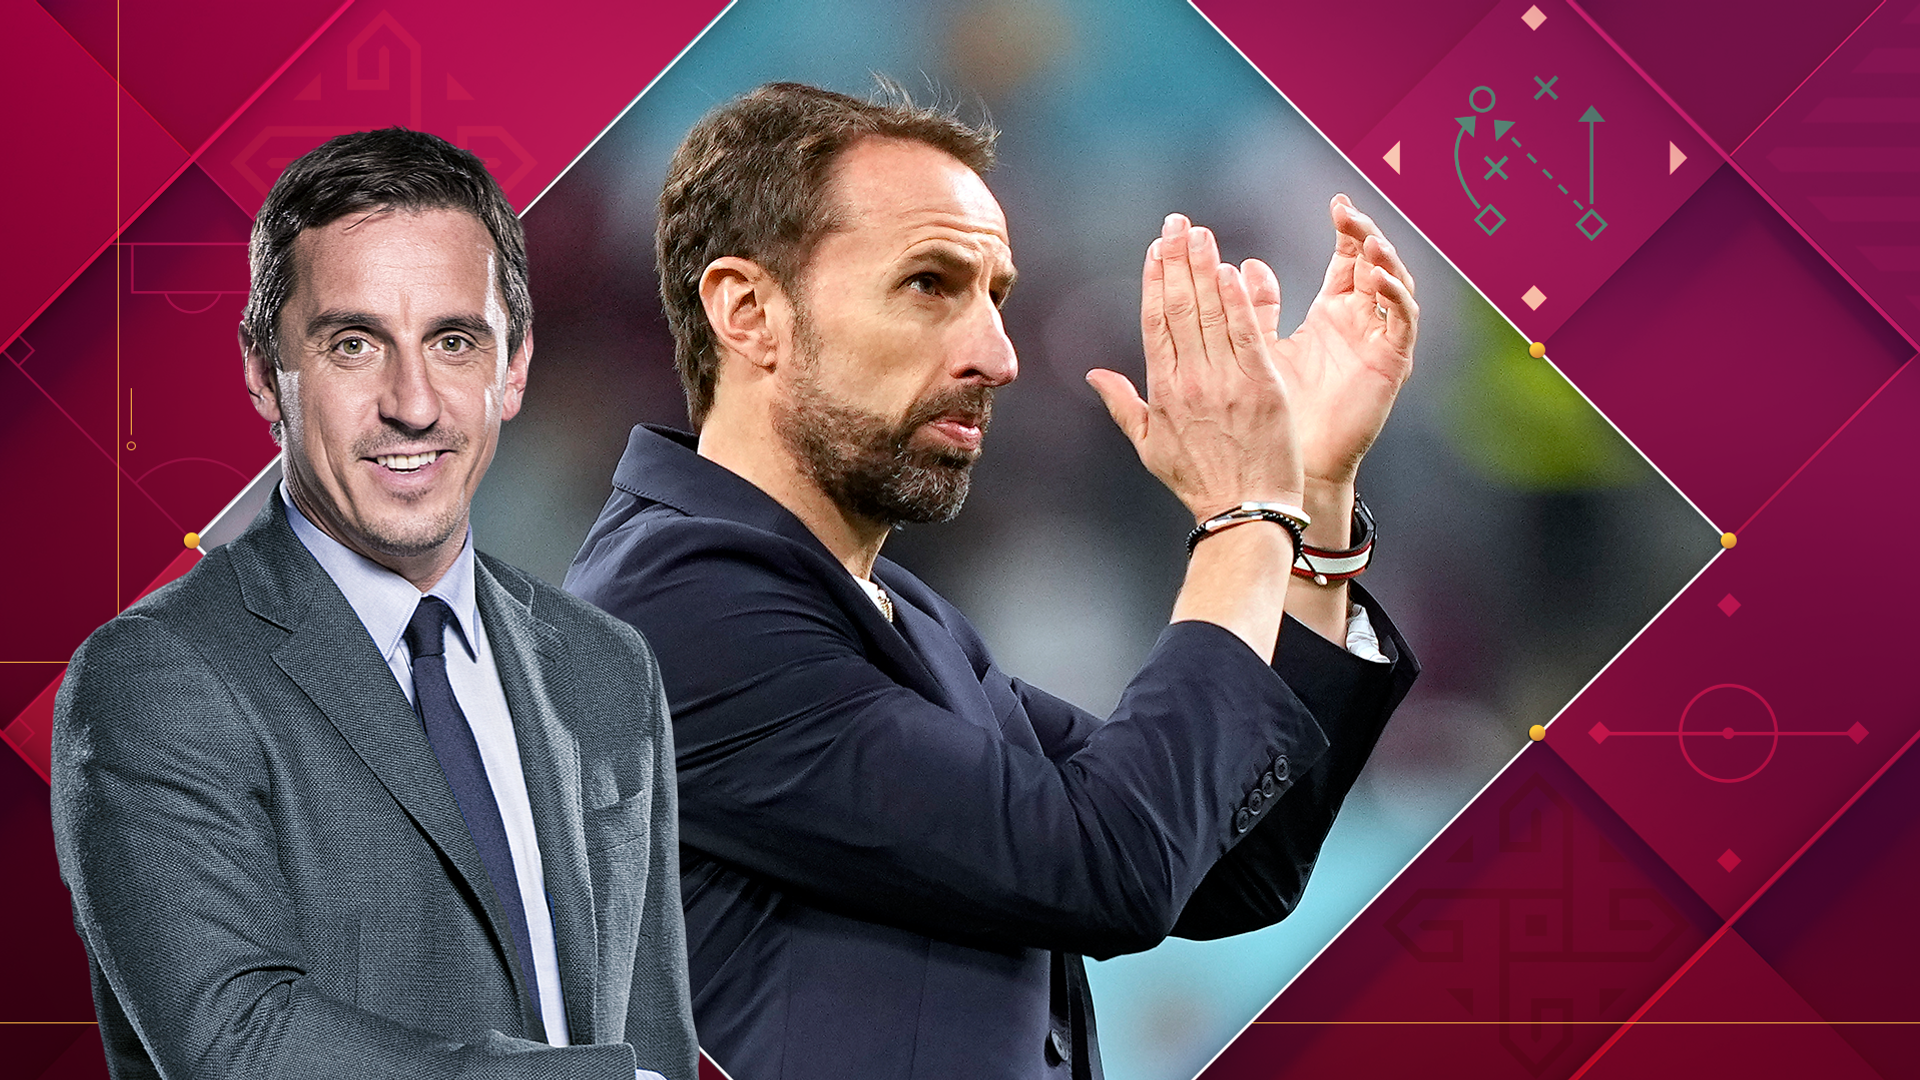 Neville welcomes Southgate staying | 'We're in a good place'